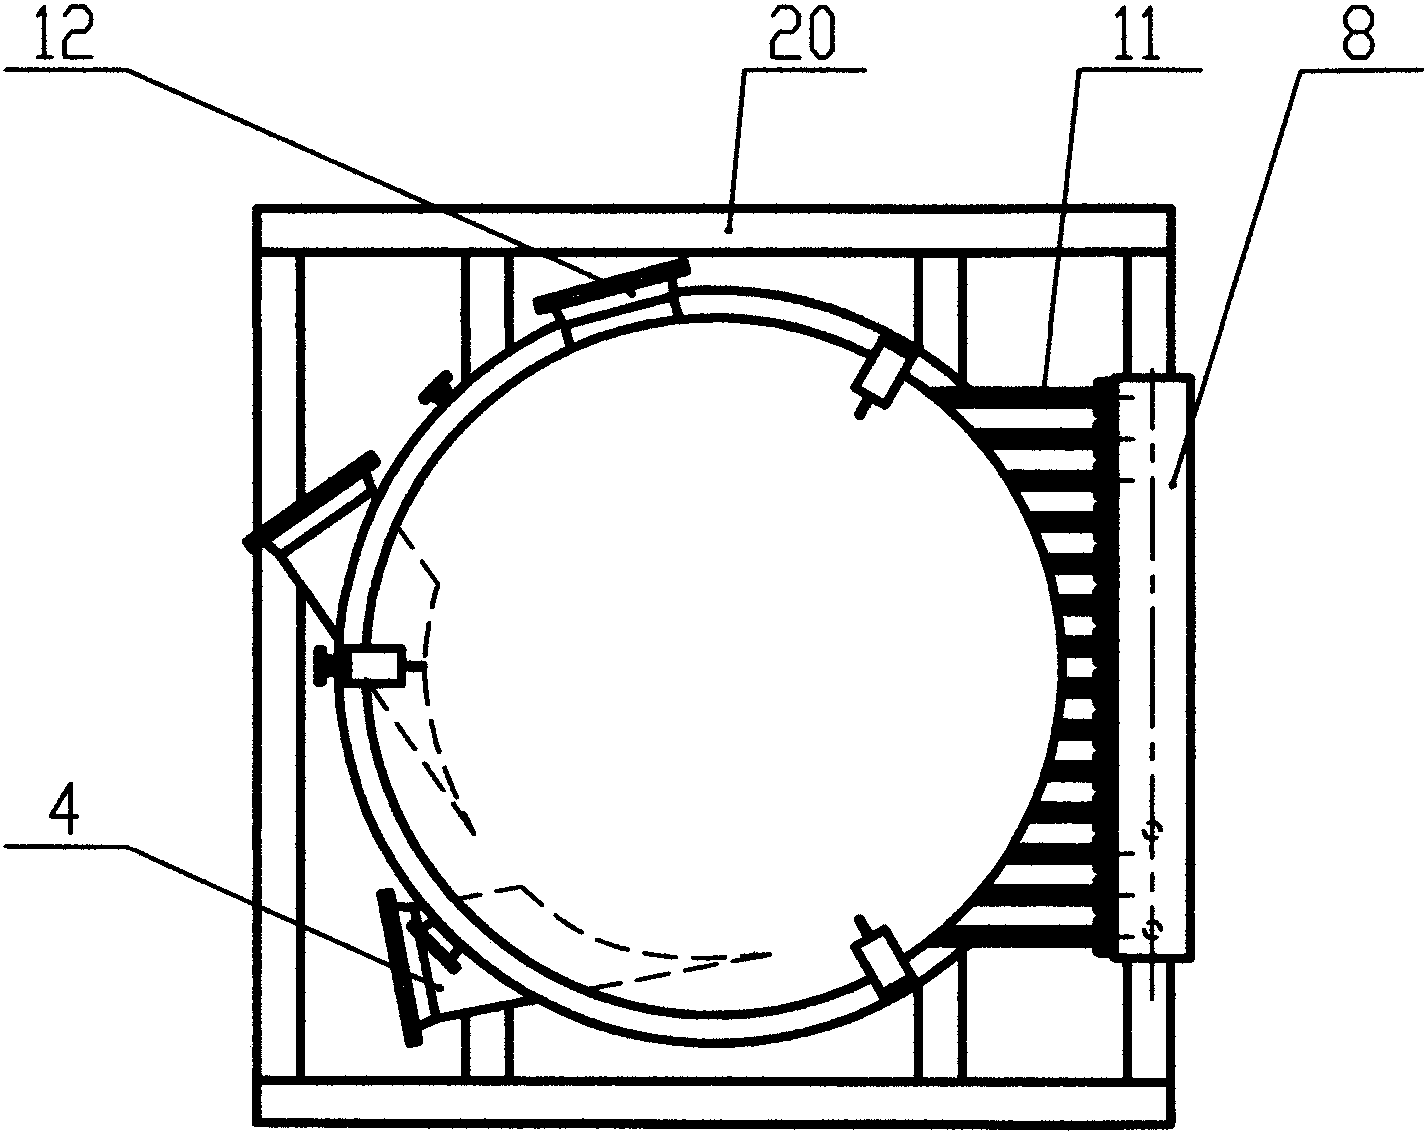 Electrolytic magnesium anode sublimate filtering device